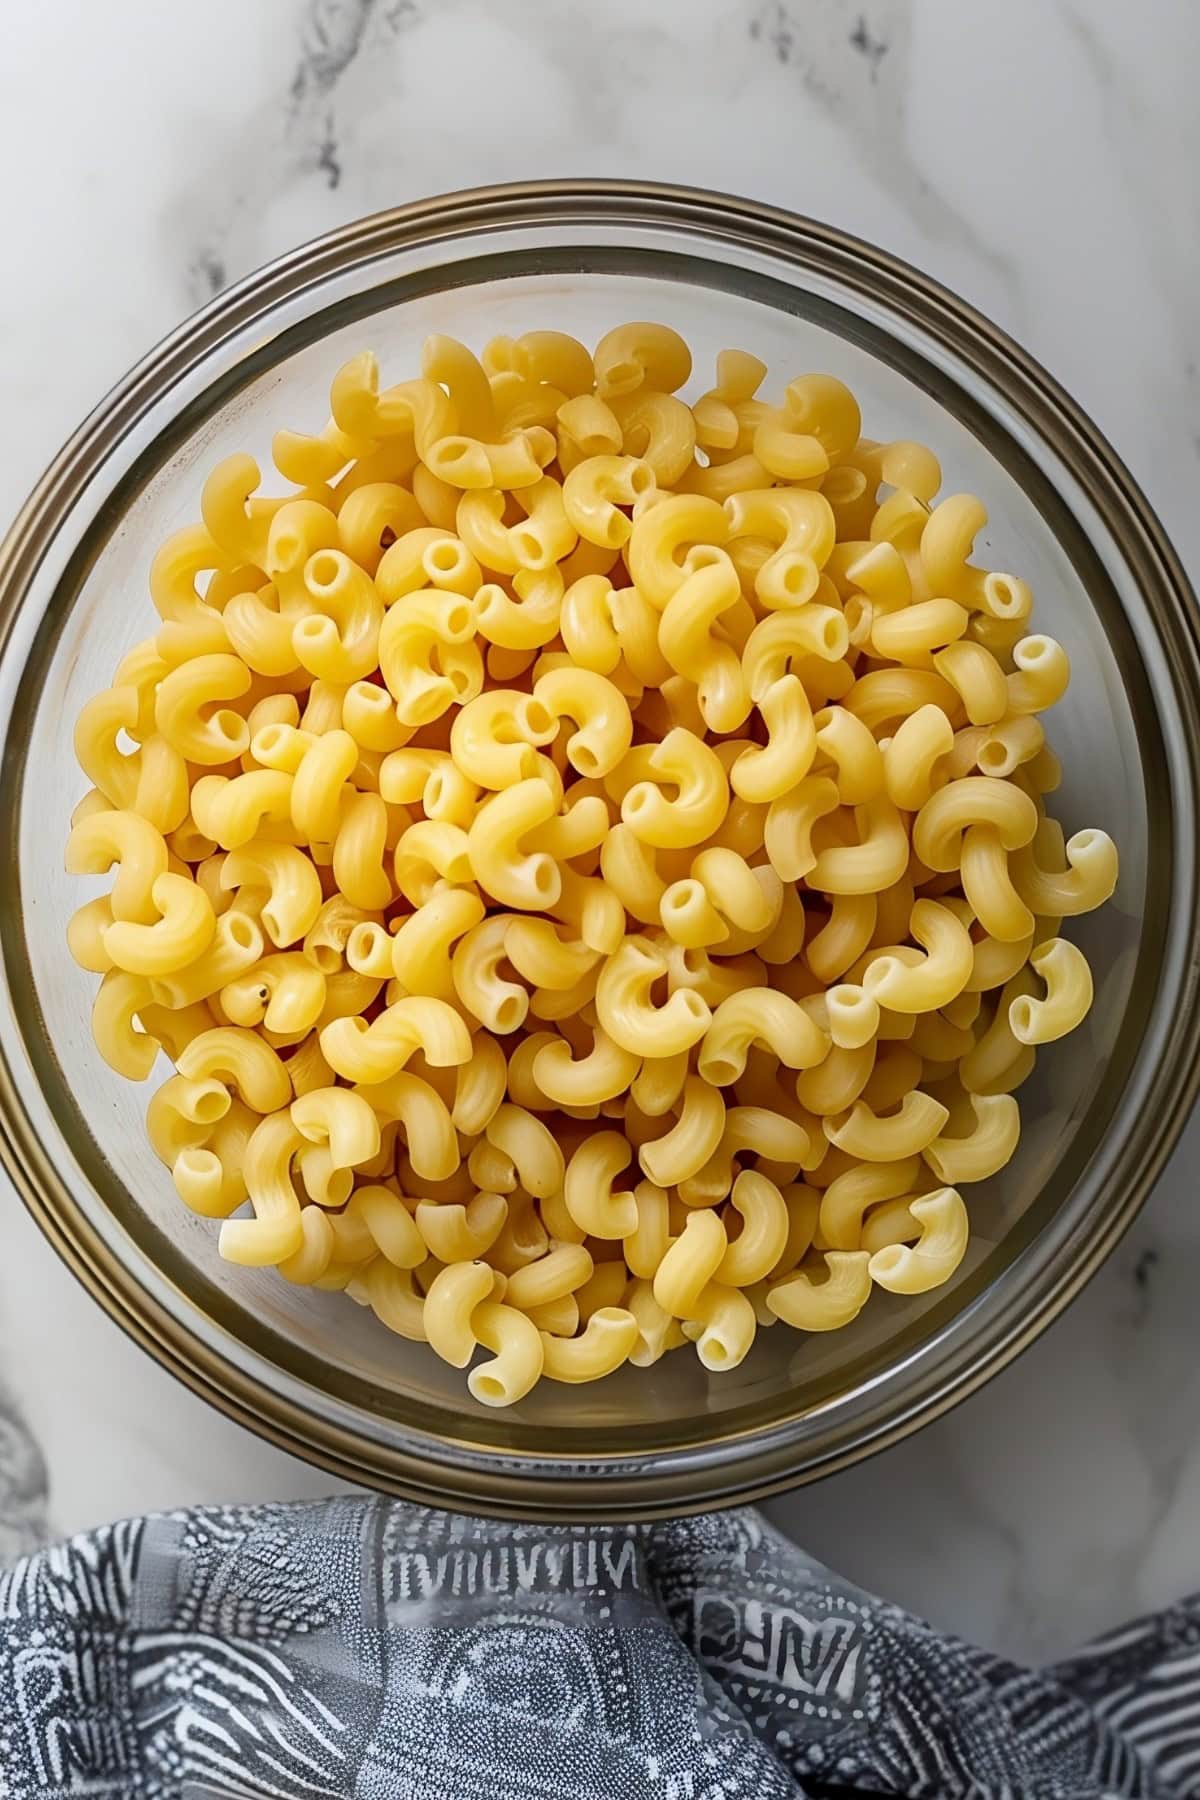 A glass bowl of uncooked elbow macaroni pasta on a white marble table